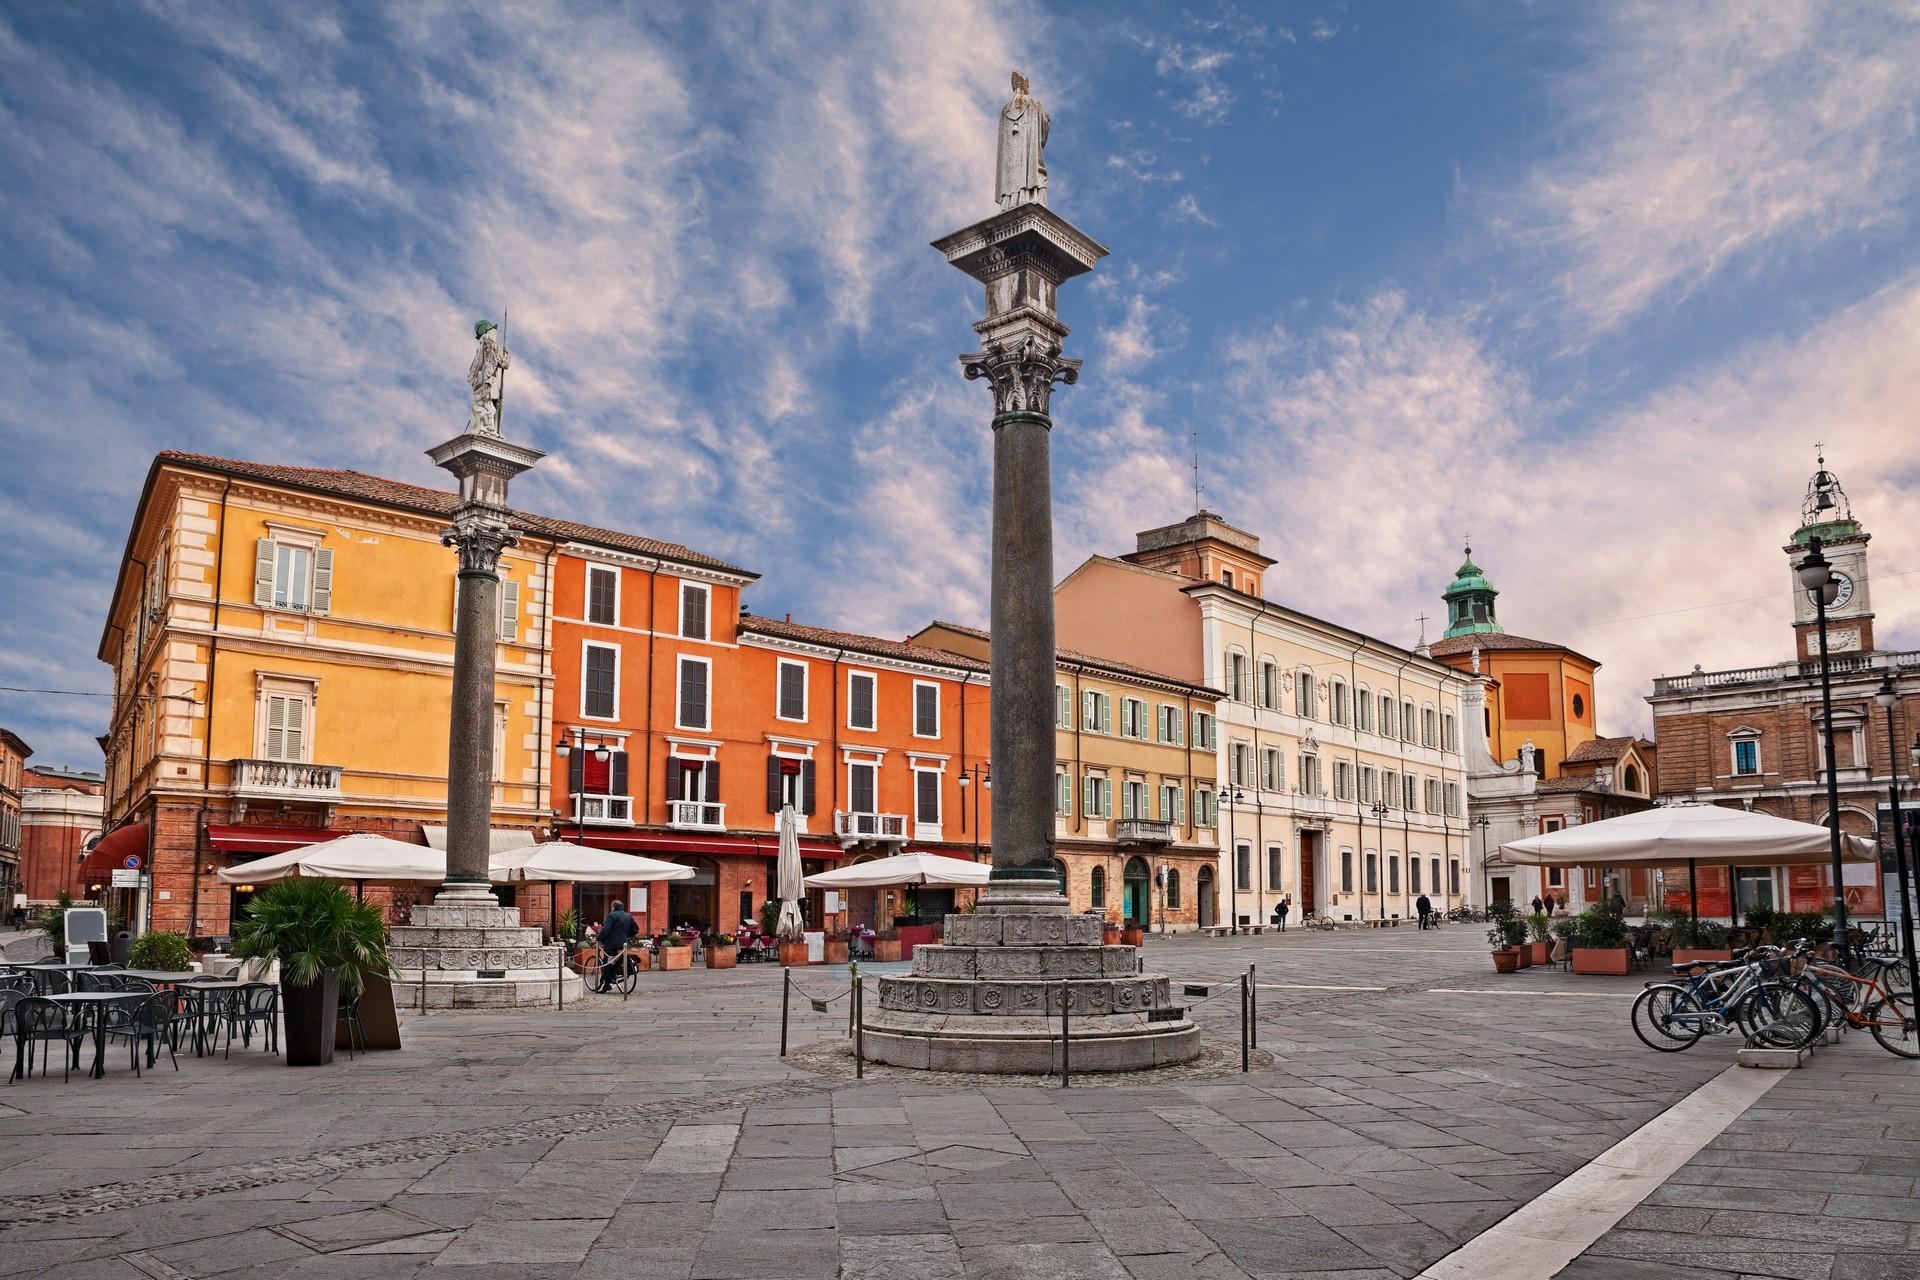 City square in Ravenna in partly cloudy weather